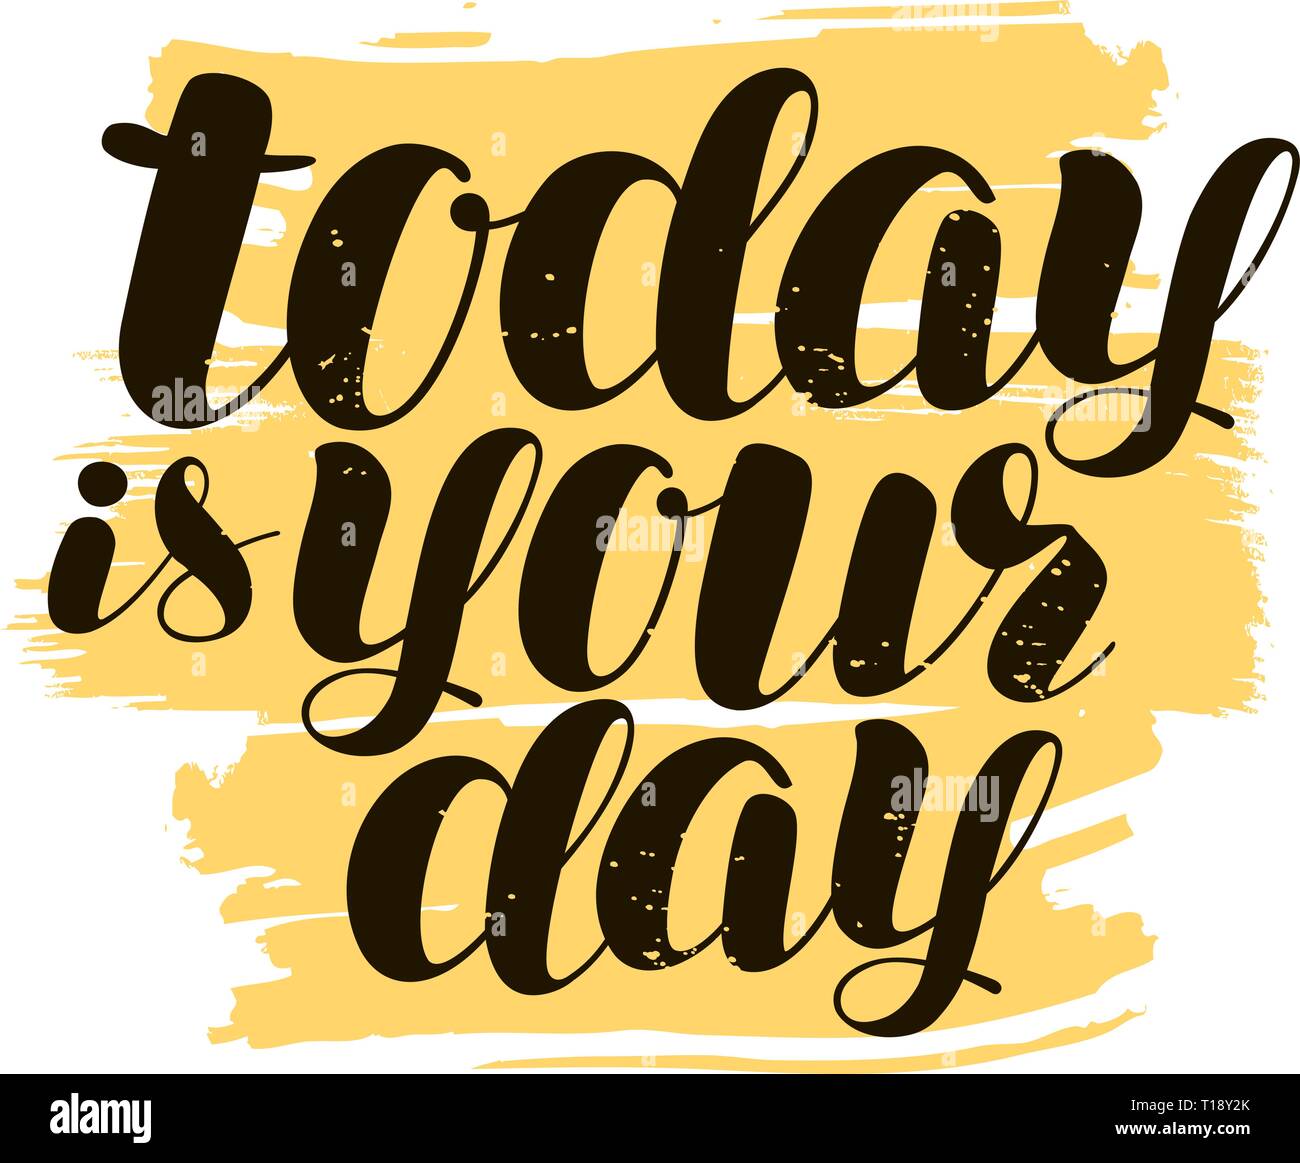 Today is Your day, hand lettering. Positive quote, calligraphy vector illustration Stock Vector